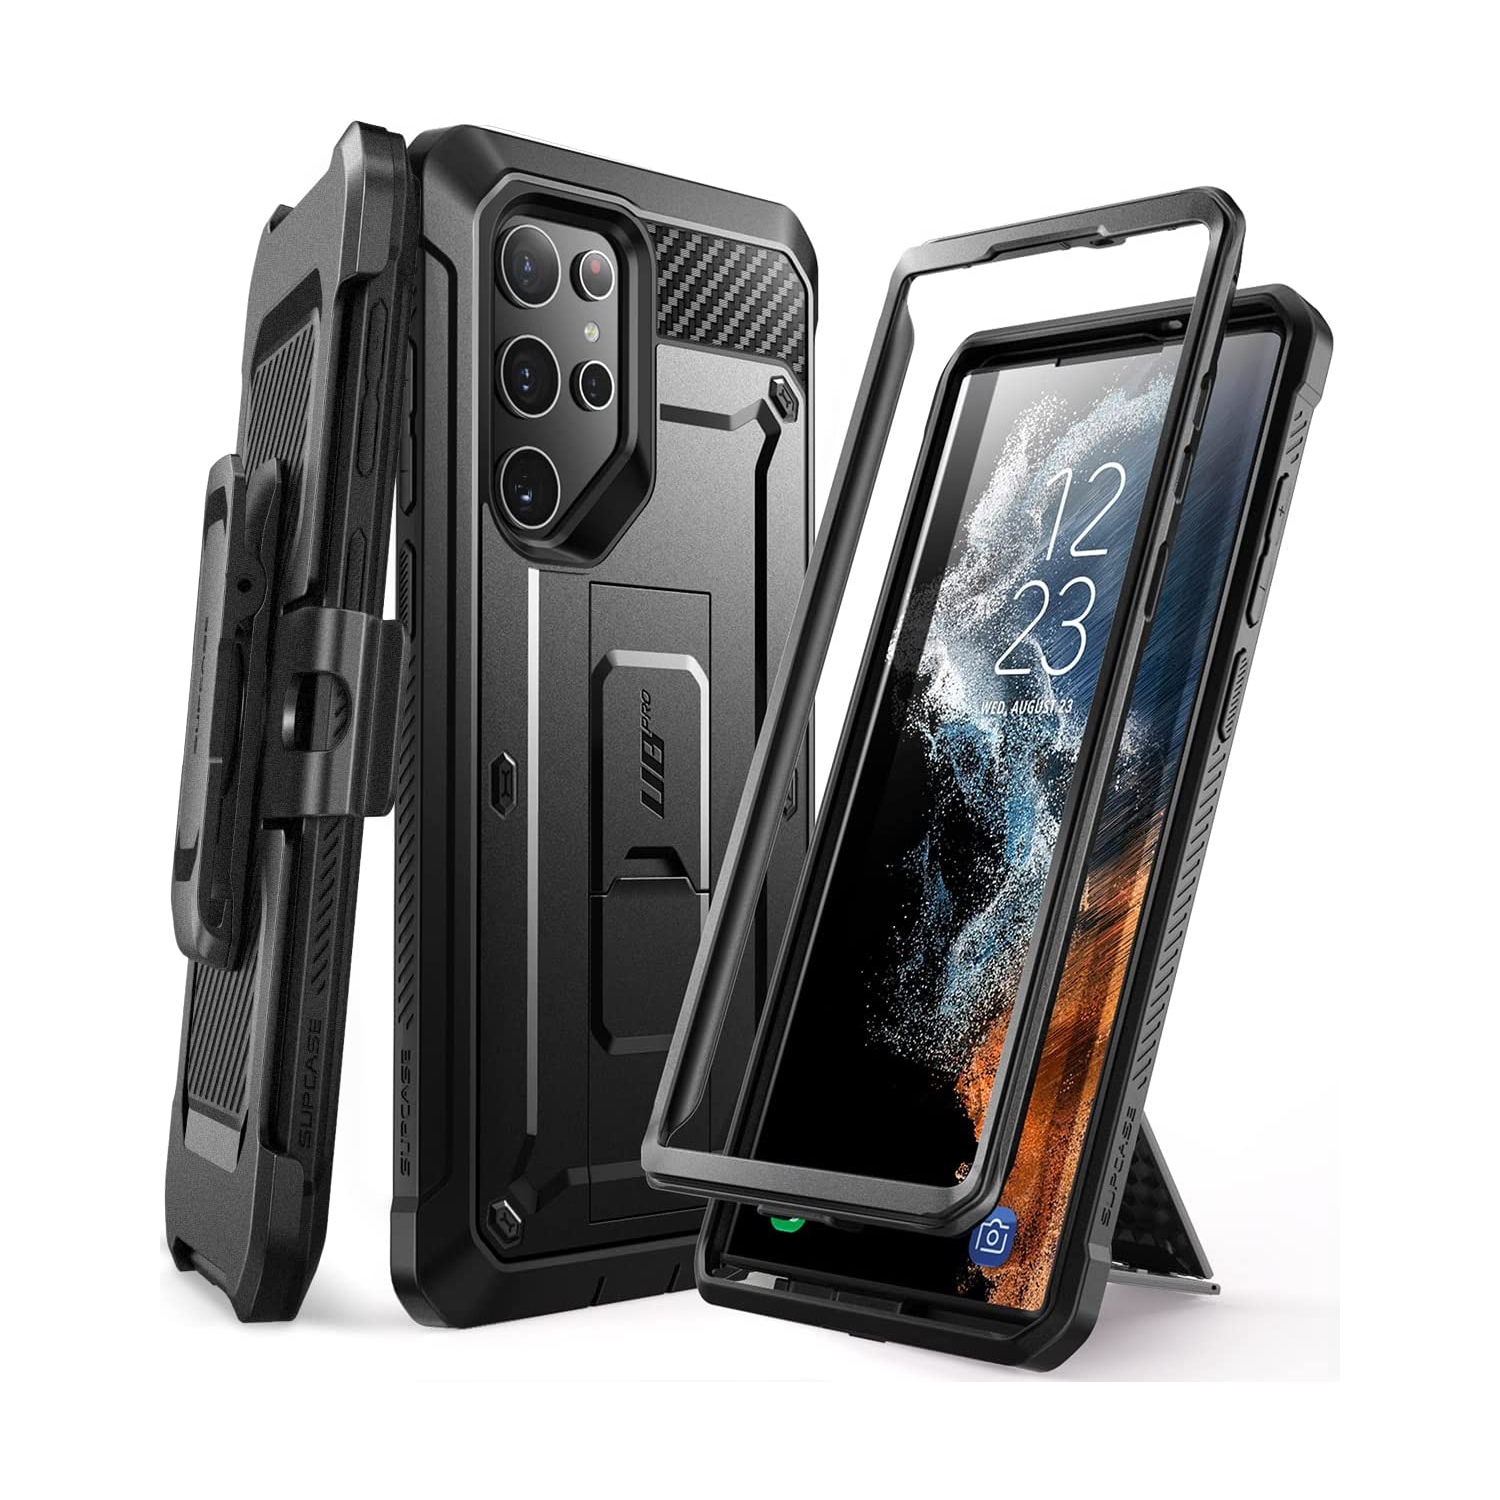 Beetle Pro Series Case for Samsung Galaxy S22 Ultra 5G Full-Body Dual Layer Rugged Belt-Clip & Kickstand Case Without Built-in Screen Protector